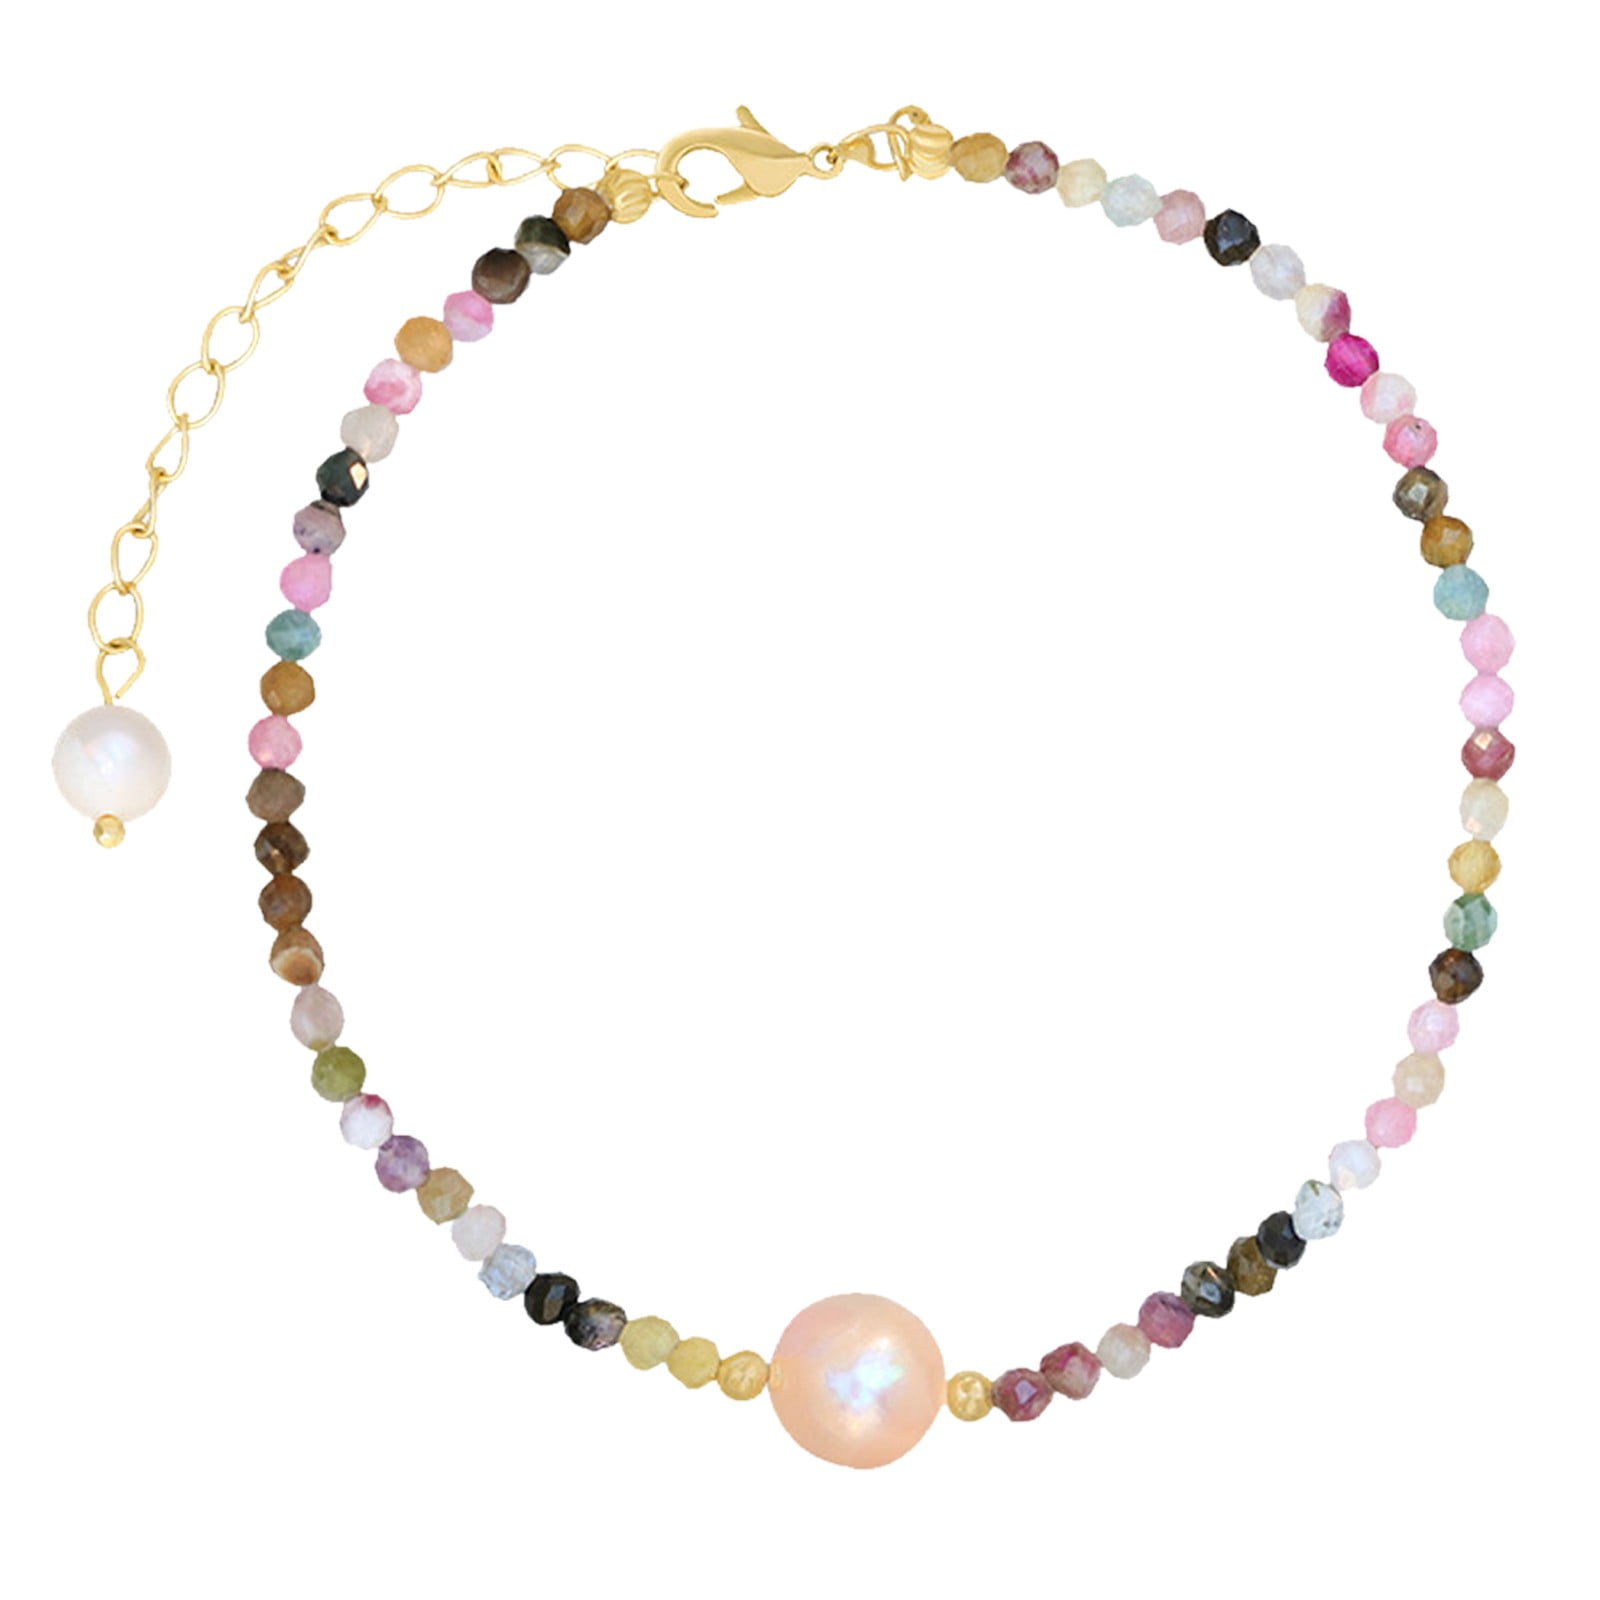 Natural Pearl Beaded Bracelet With Stainless Steel Charms Drop Delivery  Jewelry Braces From Huilaozi, $3.93 | DHgate.Com